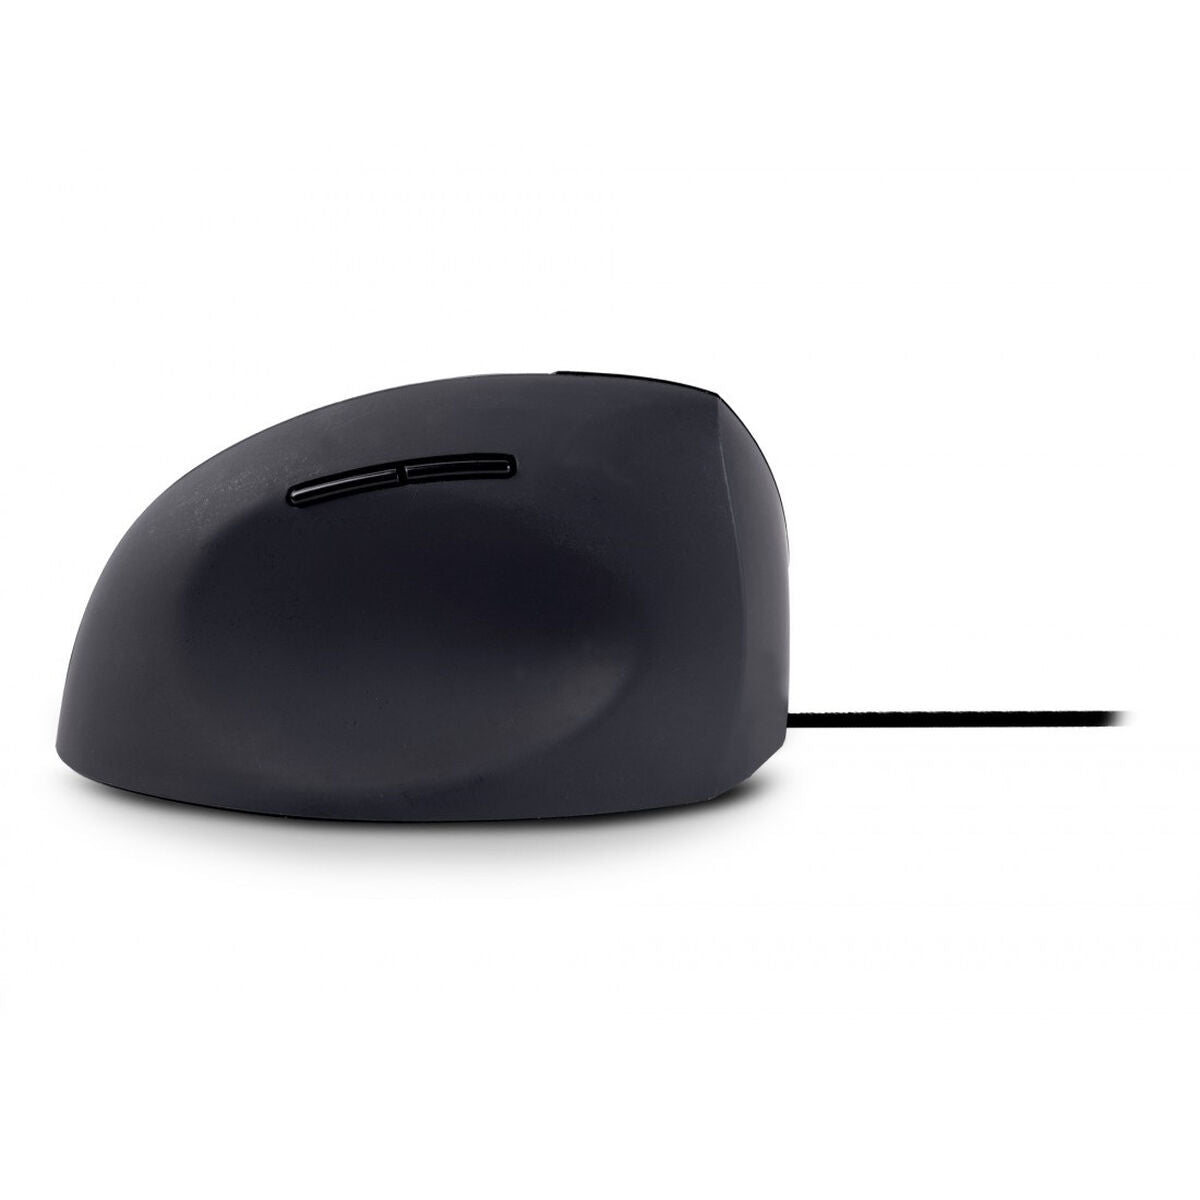 Mouse Urban Factory EML01UF-V2 Black, Urban Factory, Computing, Accessories, mouse-urban-factory-eml01uf-v2-black-1, Brand_Urban Factory, category-reference-2609, category-reference-2642, category-reference-2656, category-reference-t-19685, category-reference-t-19908, category-reference-t-21353, category-reference-t-25626, computers / peripherals, Condition_NEW, office, Price_50 - 100, Teleworking, RiotNook